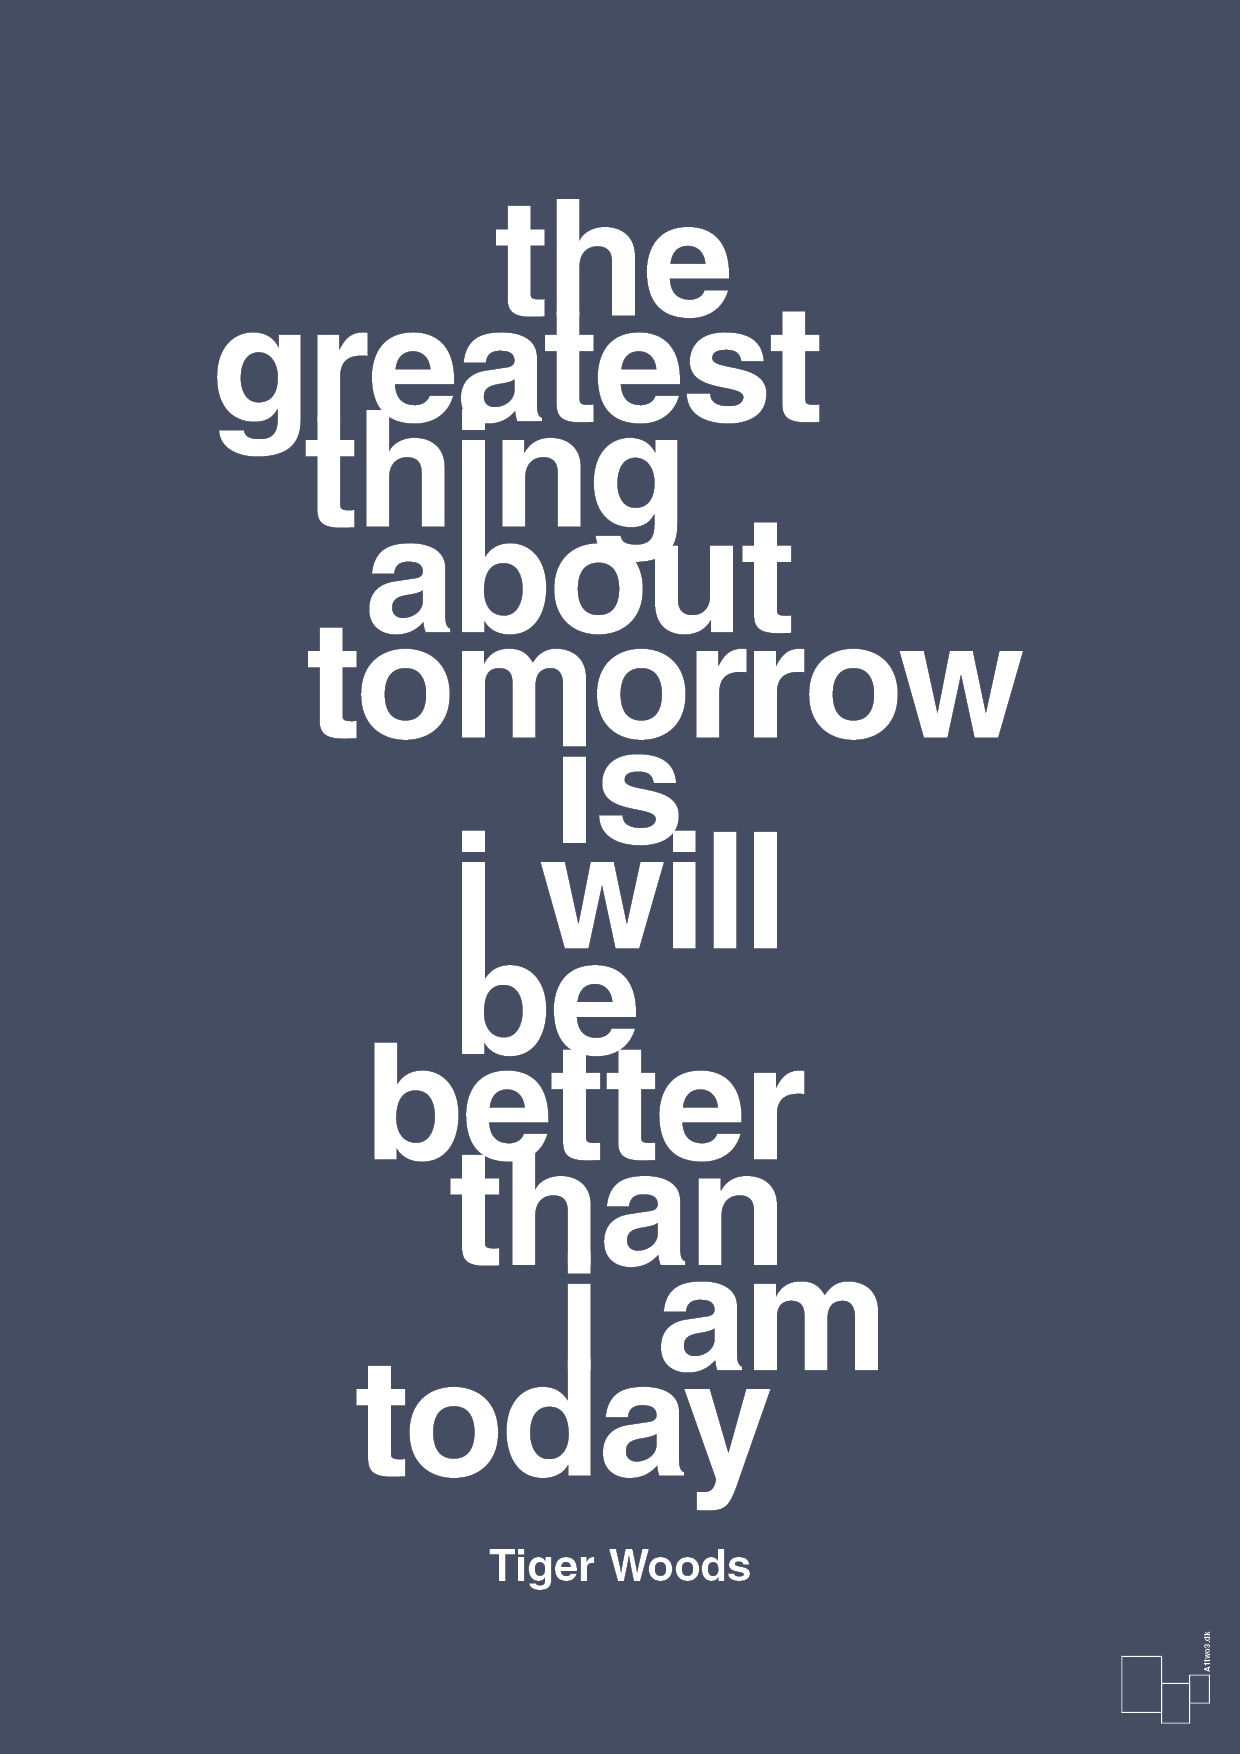 the greatest thing about tomorrow is i will be better than i am today - Plakat med Citater i Petrol